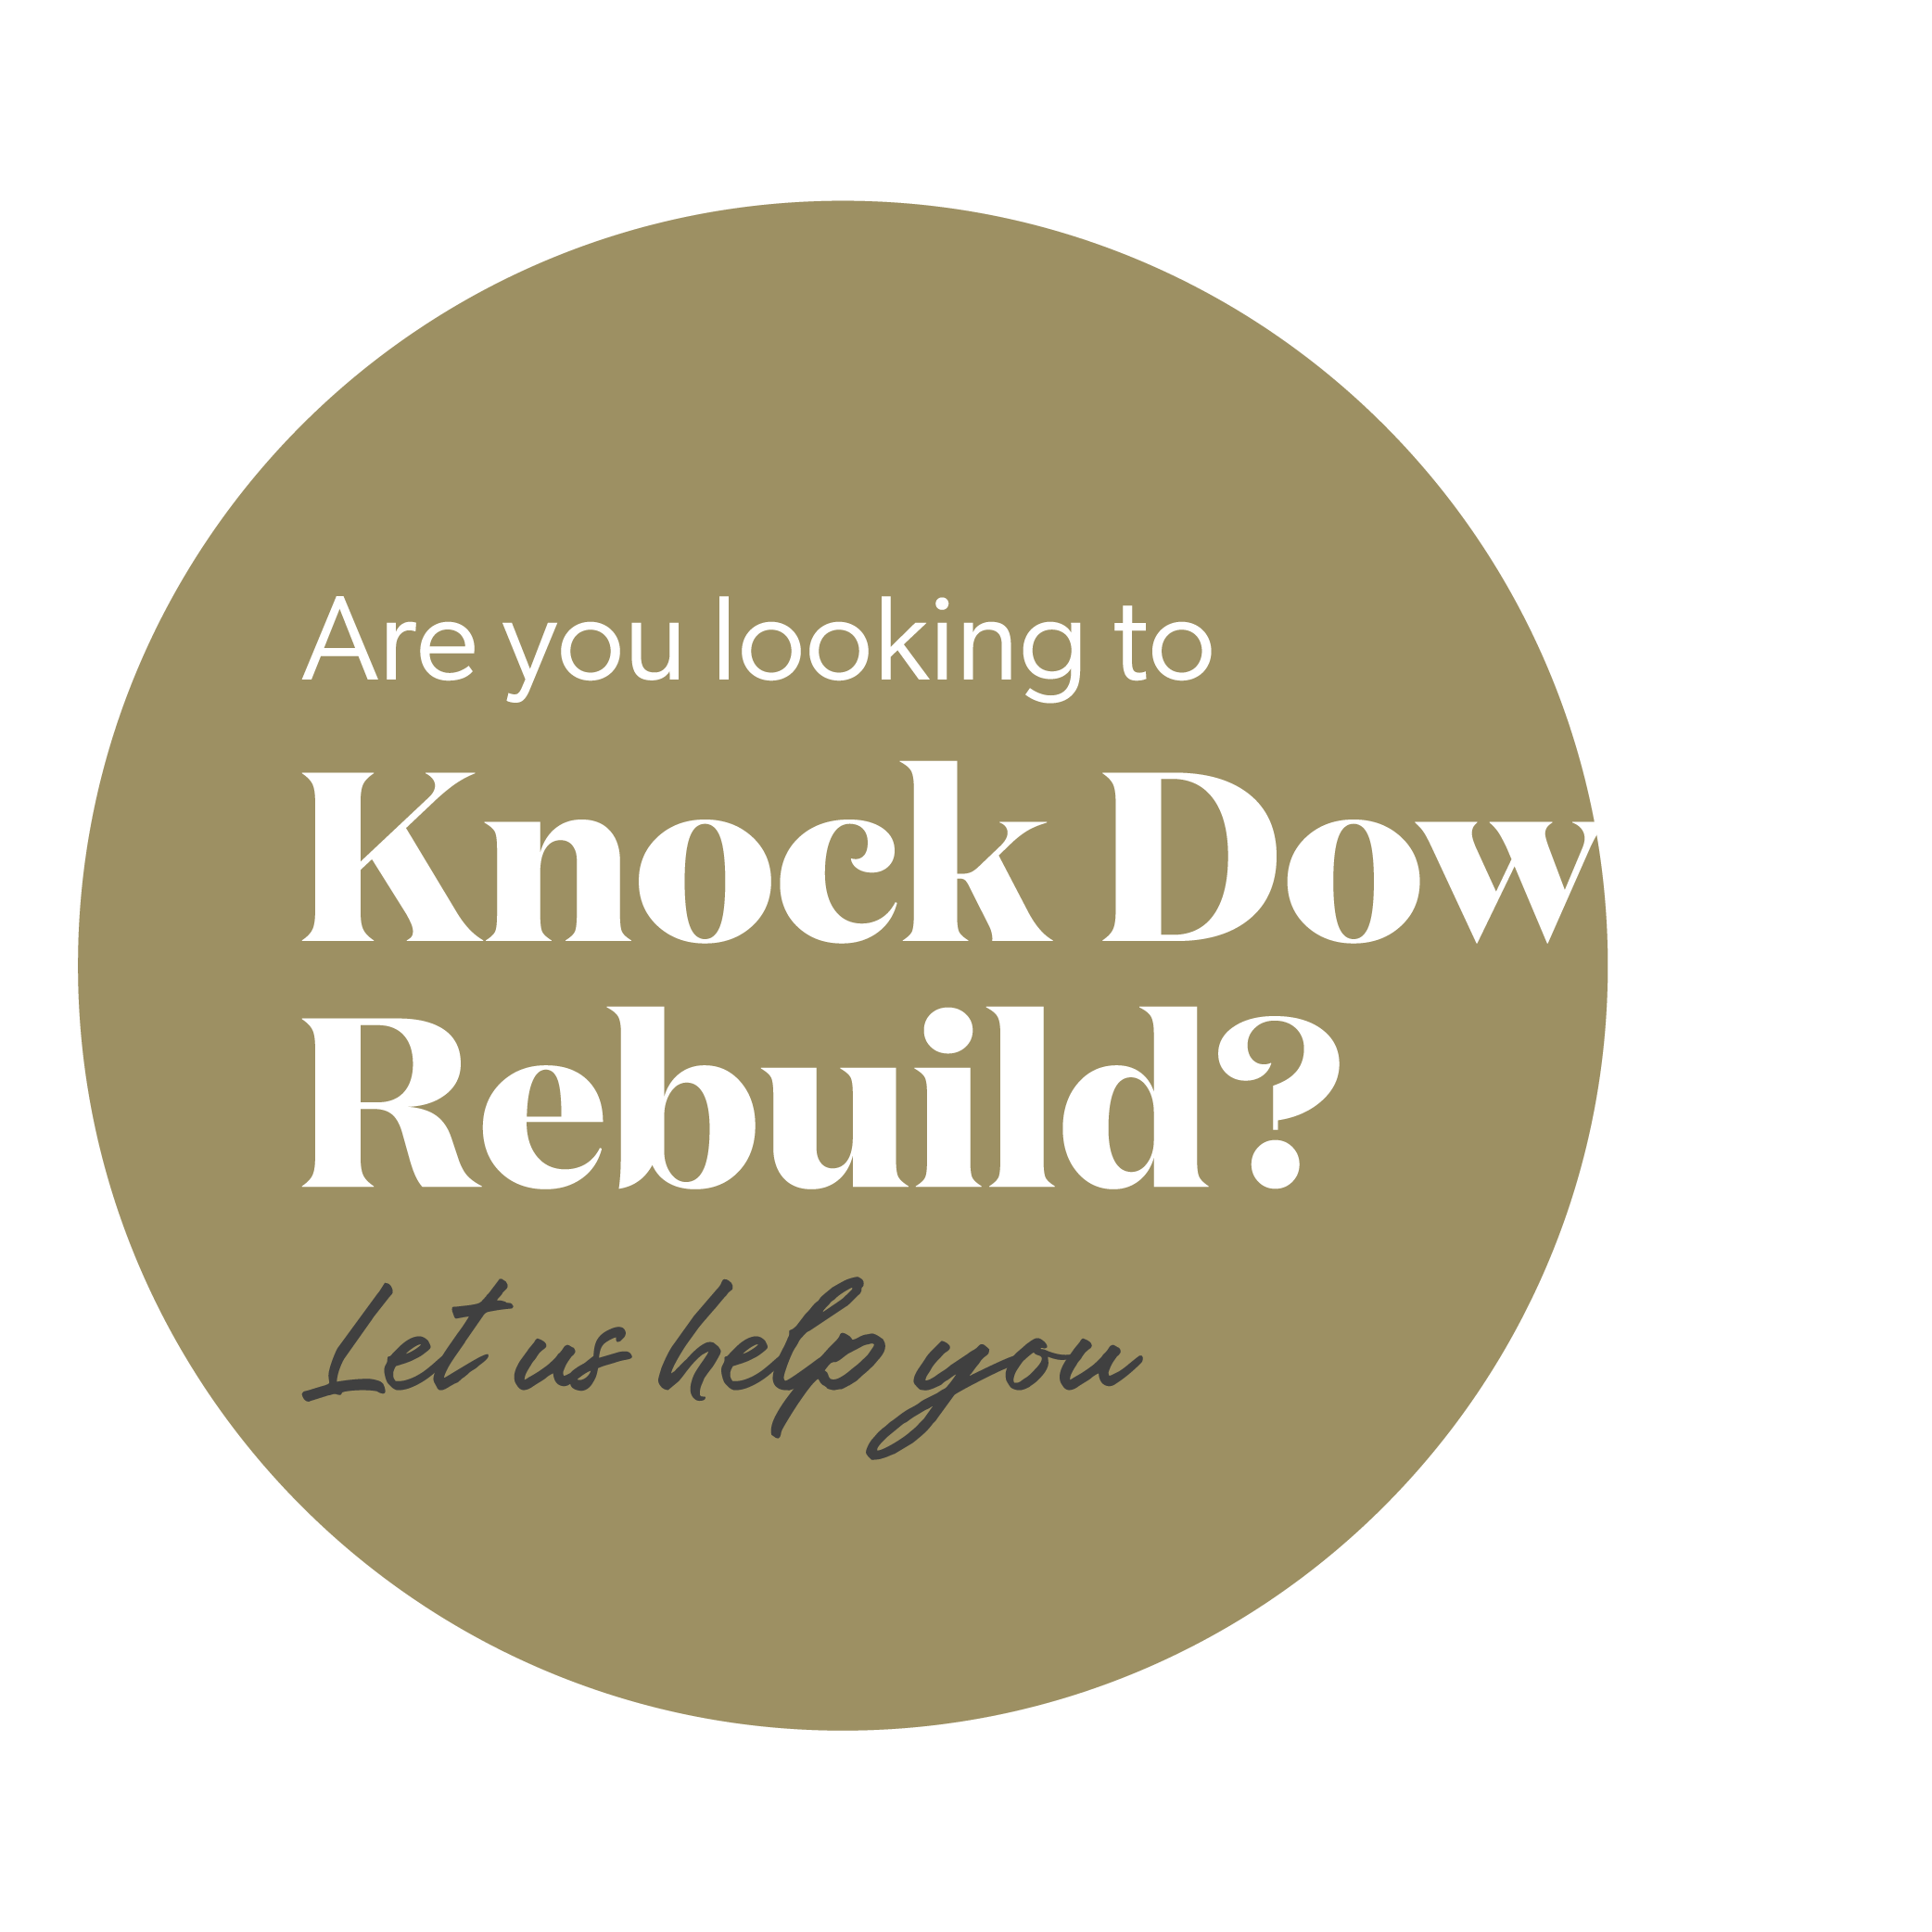 Are you looking to Knock Down Rebuild? Let us help you